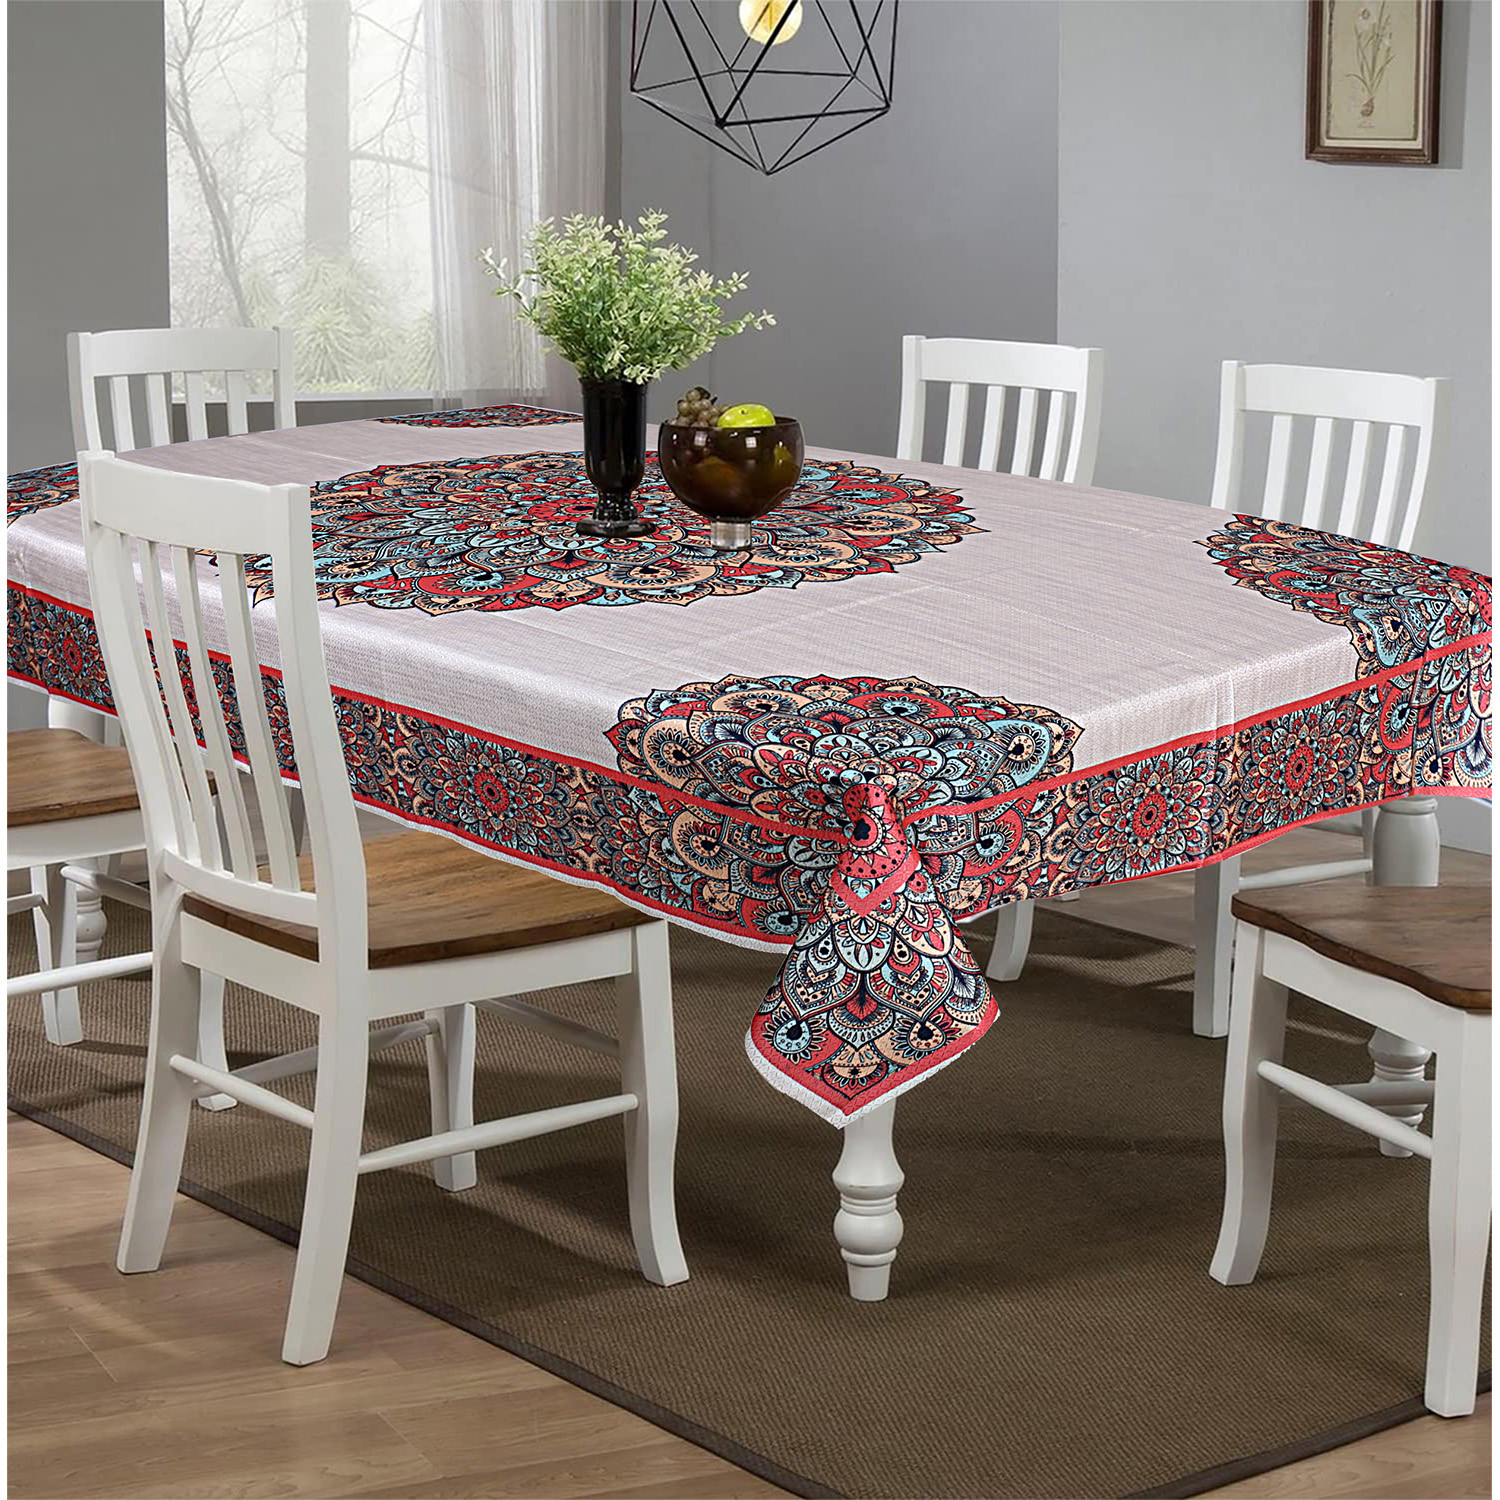 Kuber Industries Dining Table Cover|Poly Cotton Stain-Resistant & Dust-Proof Rangoli Pattern|Tablecloth Protector for Home Decoration, 60X90 Inch (Peach)